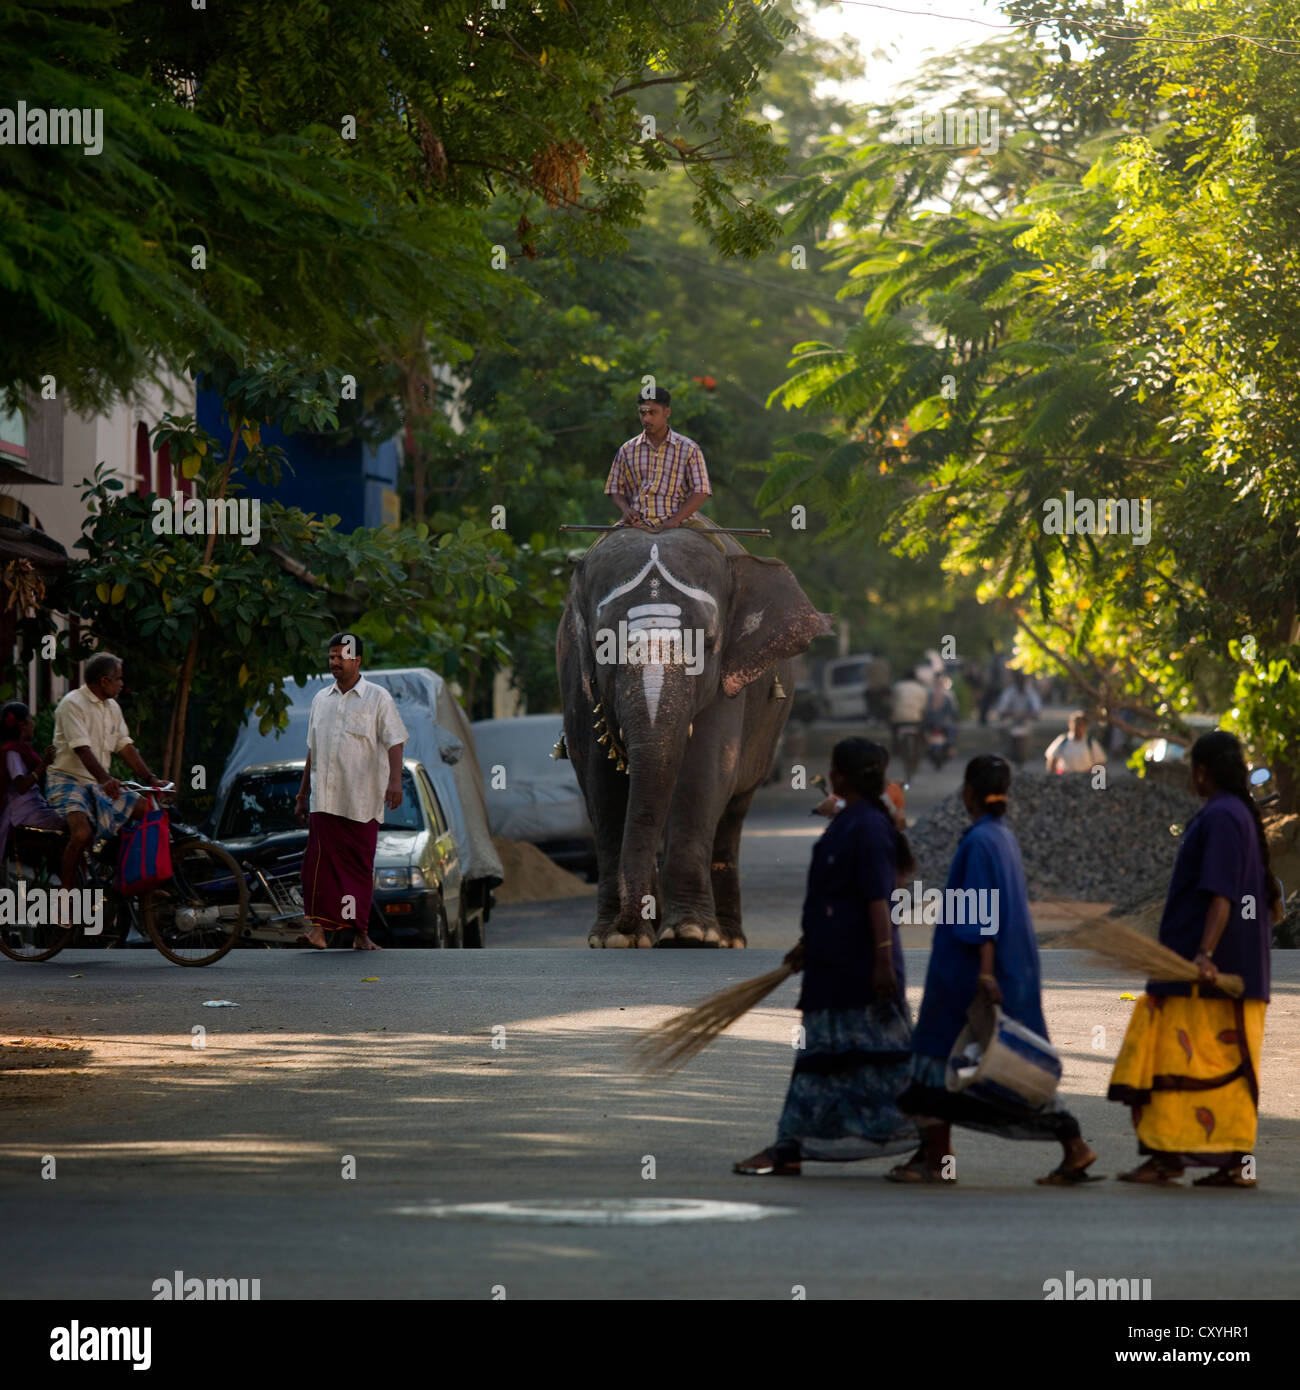 Elephant Wearing Traditional Painting On Its Forehead Crossing A Street Wiht Man On Its Back, Pondicherry, India Stock Photo